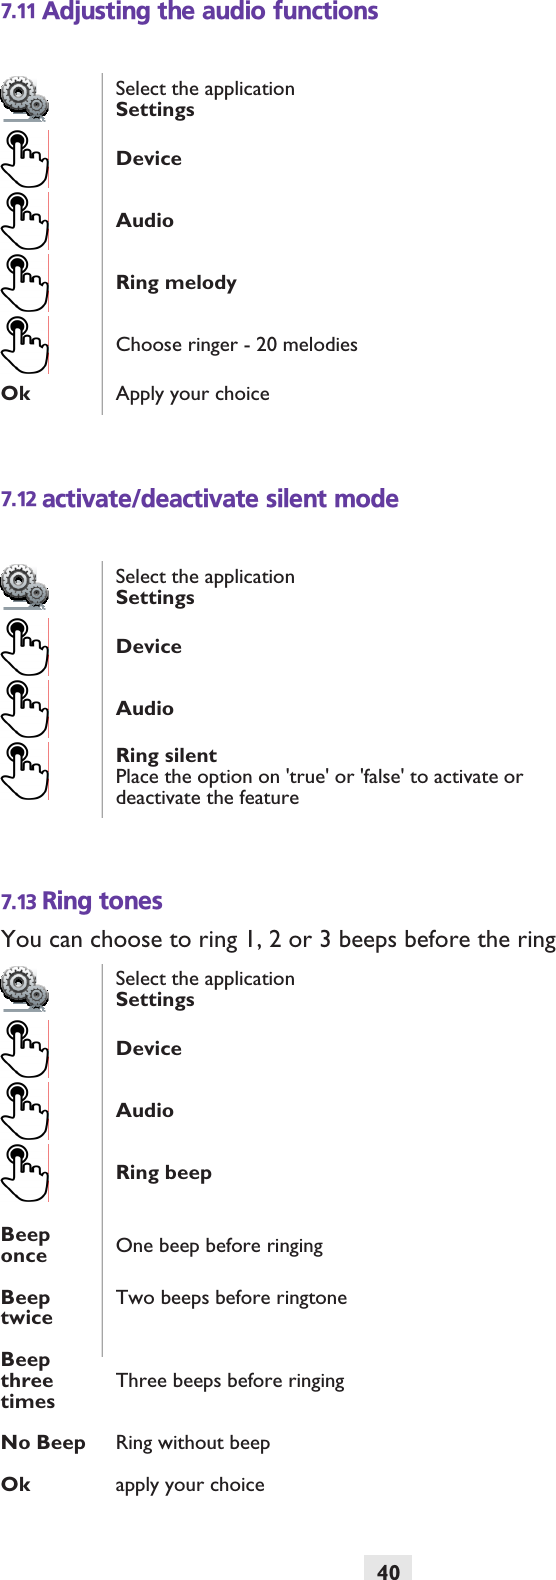 407.11 Adjusting the audio functions7.12 activate/deactivate silent mode7.13 Ring tonesYou can choose to ring 1, 2 or 3 beeps before the ringSelect the applicationSettingsDeviceAudioRing melodyChoose ringer - 20 melodiesOk Apply your choiceSelect the applicationSettingsDeviceAudioRing silentPlace the option on &apos;true&apos; or &apos;false&apos; to activate or deactivate the featureSelect the applicationSettingsDeviceAudioRing beepBeep once One beep before ringingBeep twiceTwo beeps before ringtoneBeep three timesThree beeps before ringingNo Beep Ring without beepOk apply your choice